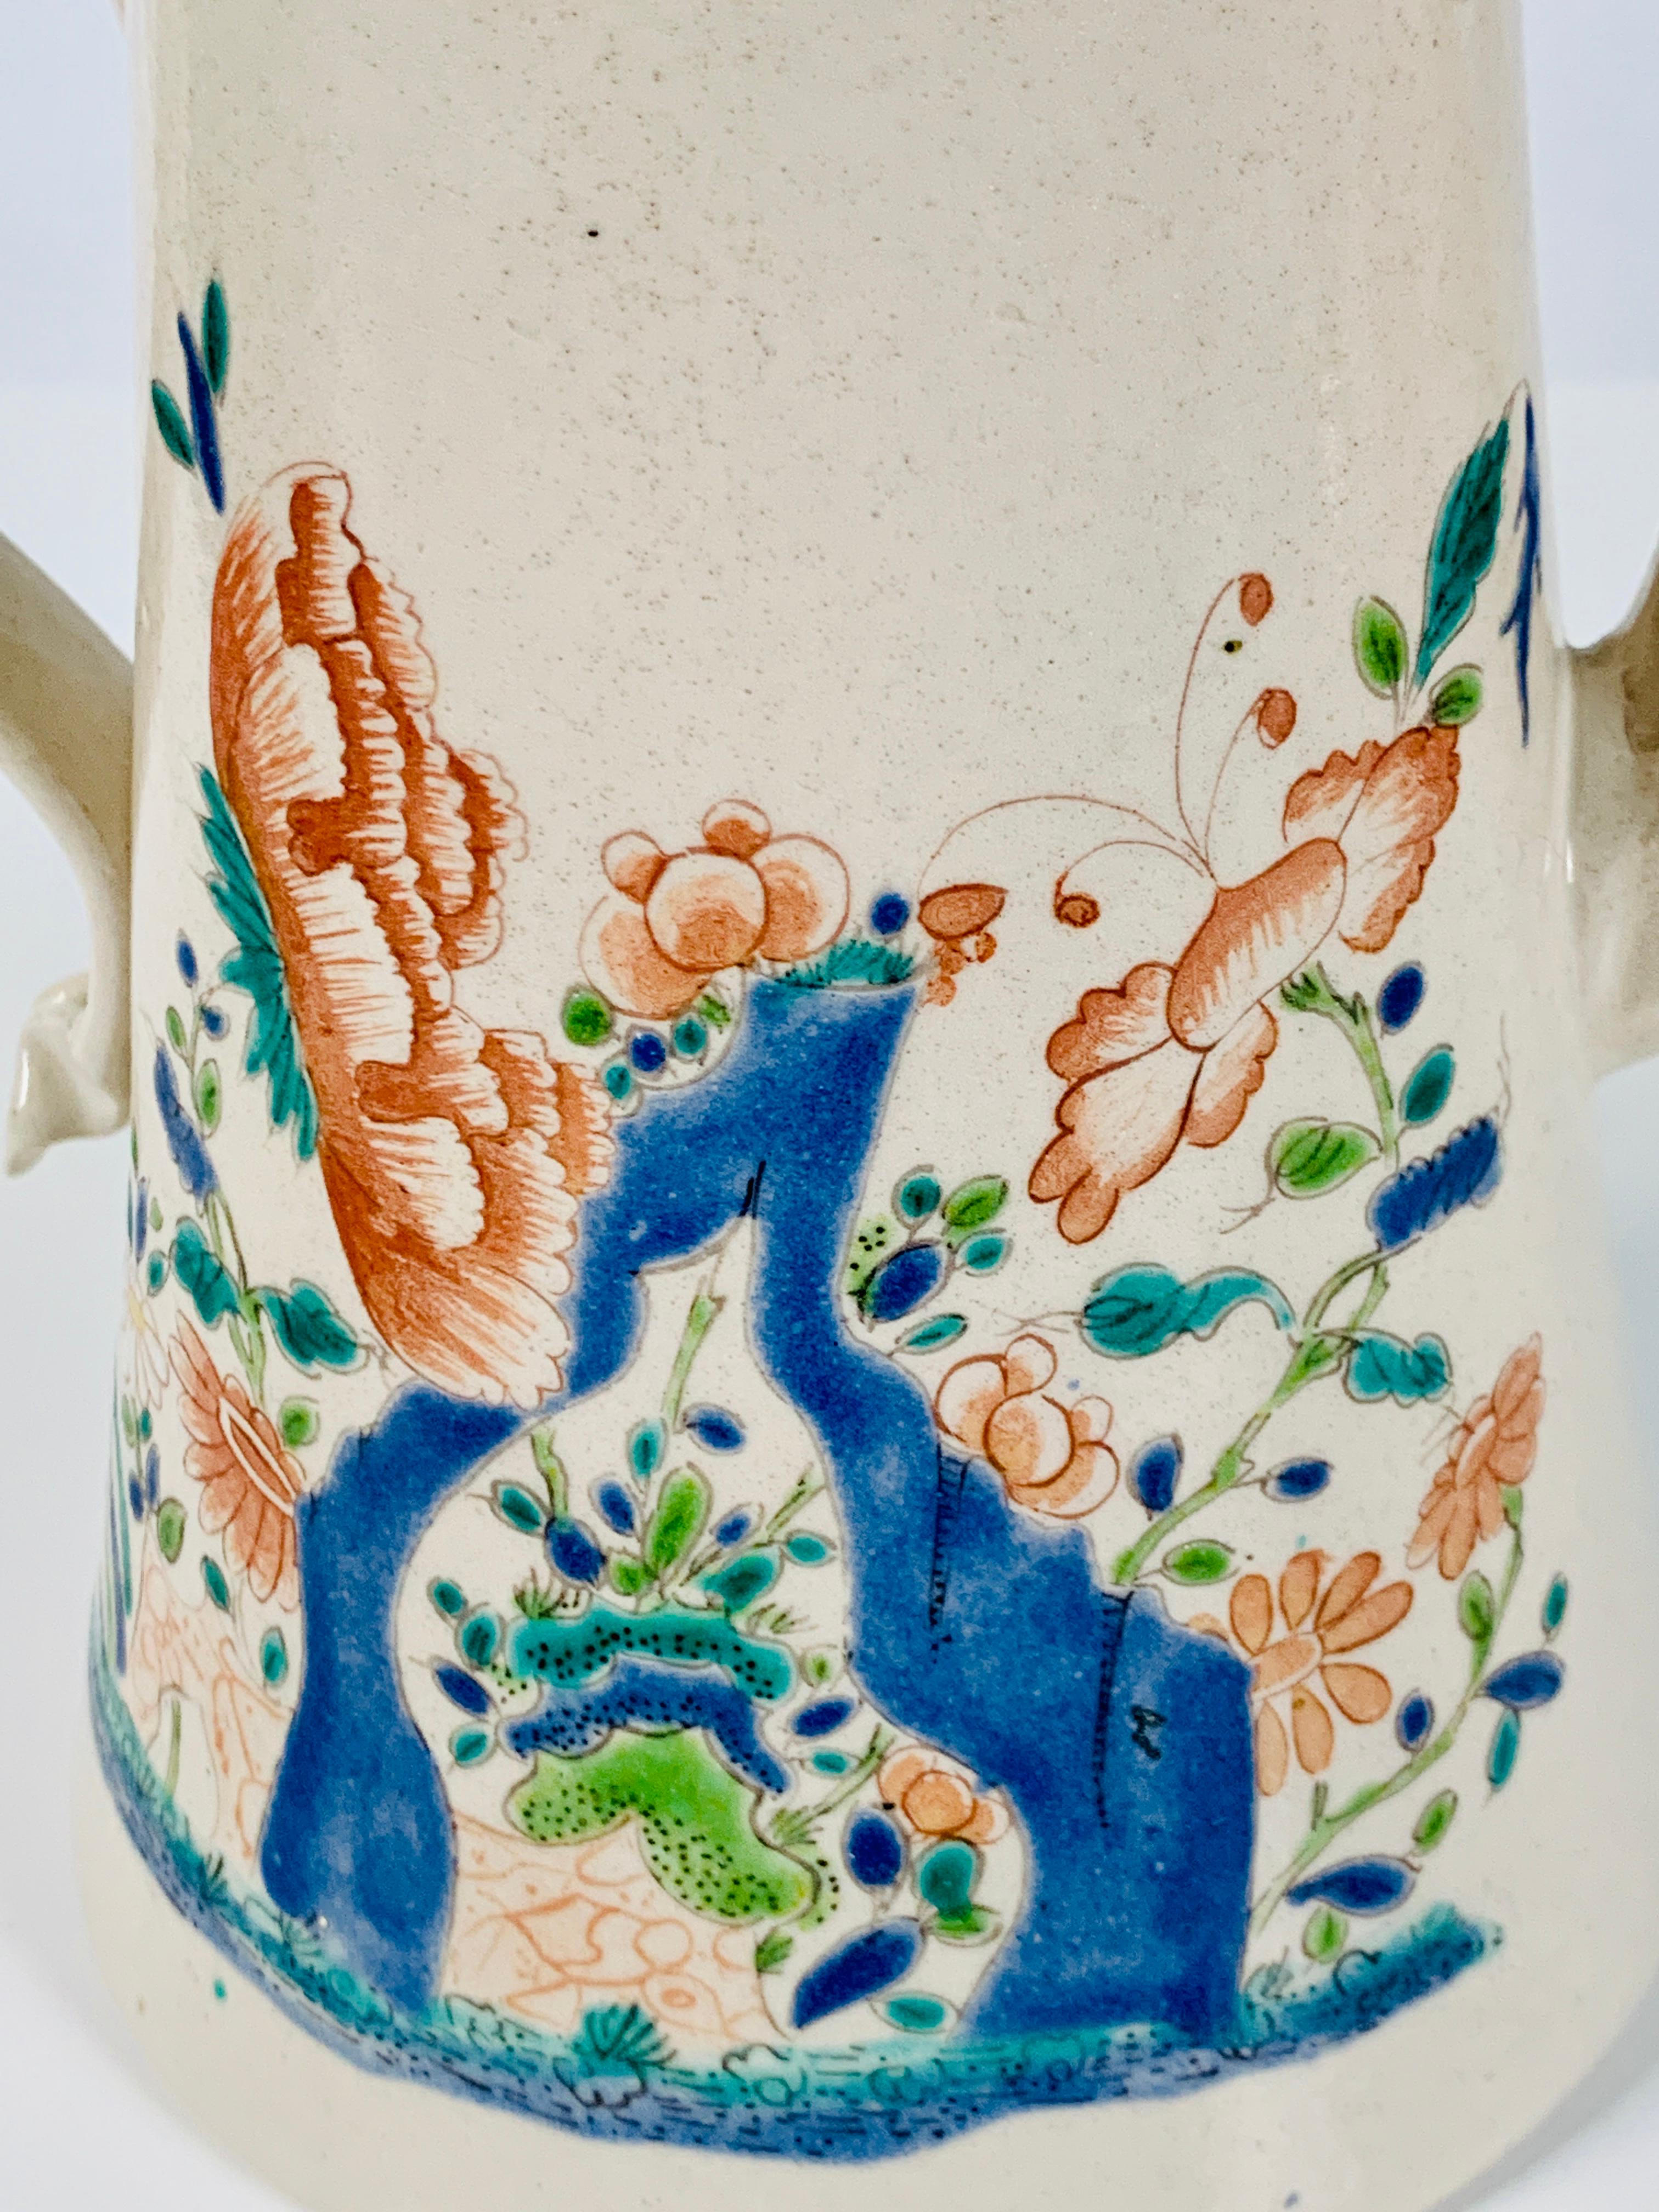 Hand-Painted Salt-Glazed Coffee Pot Mid-18th Century England with Chinoiserie Design